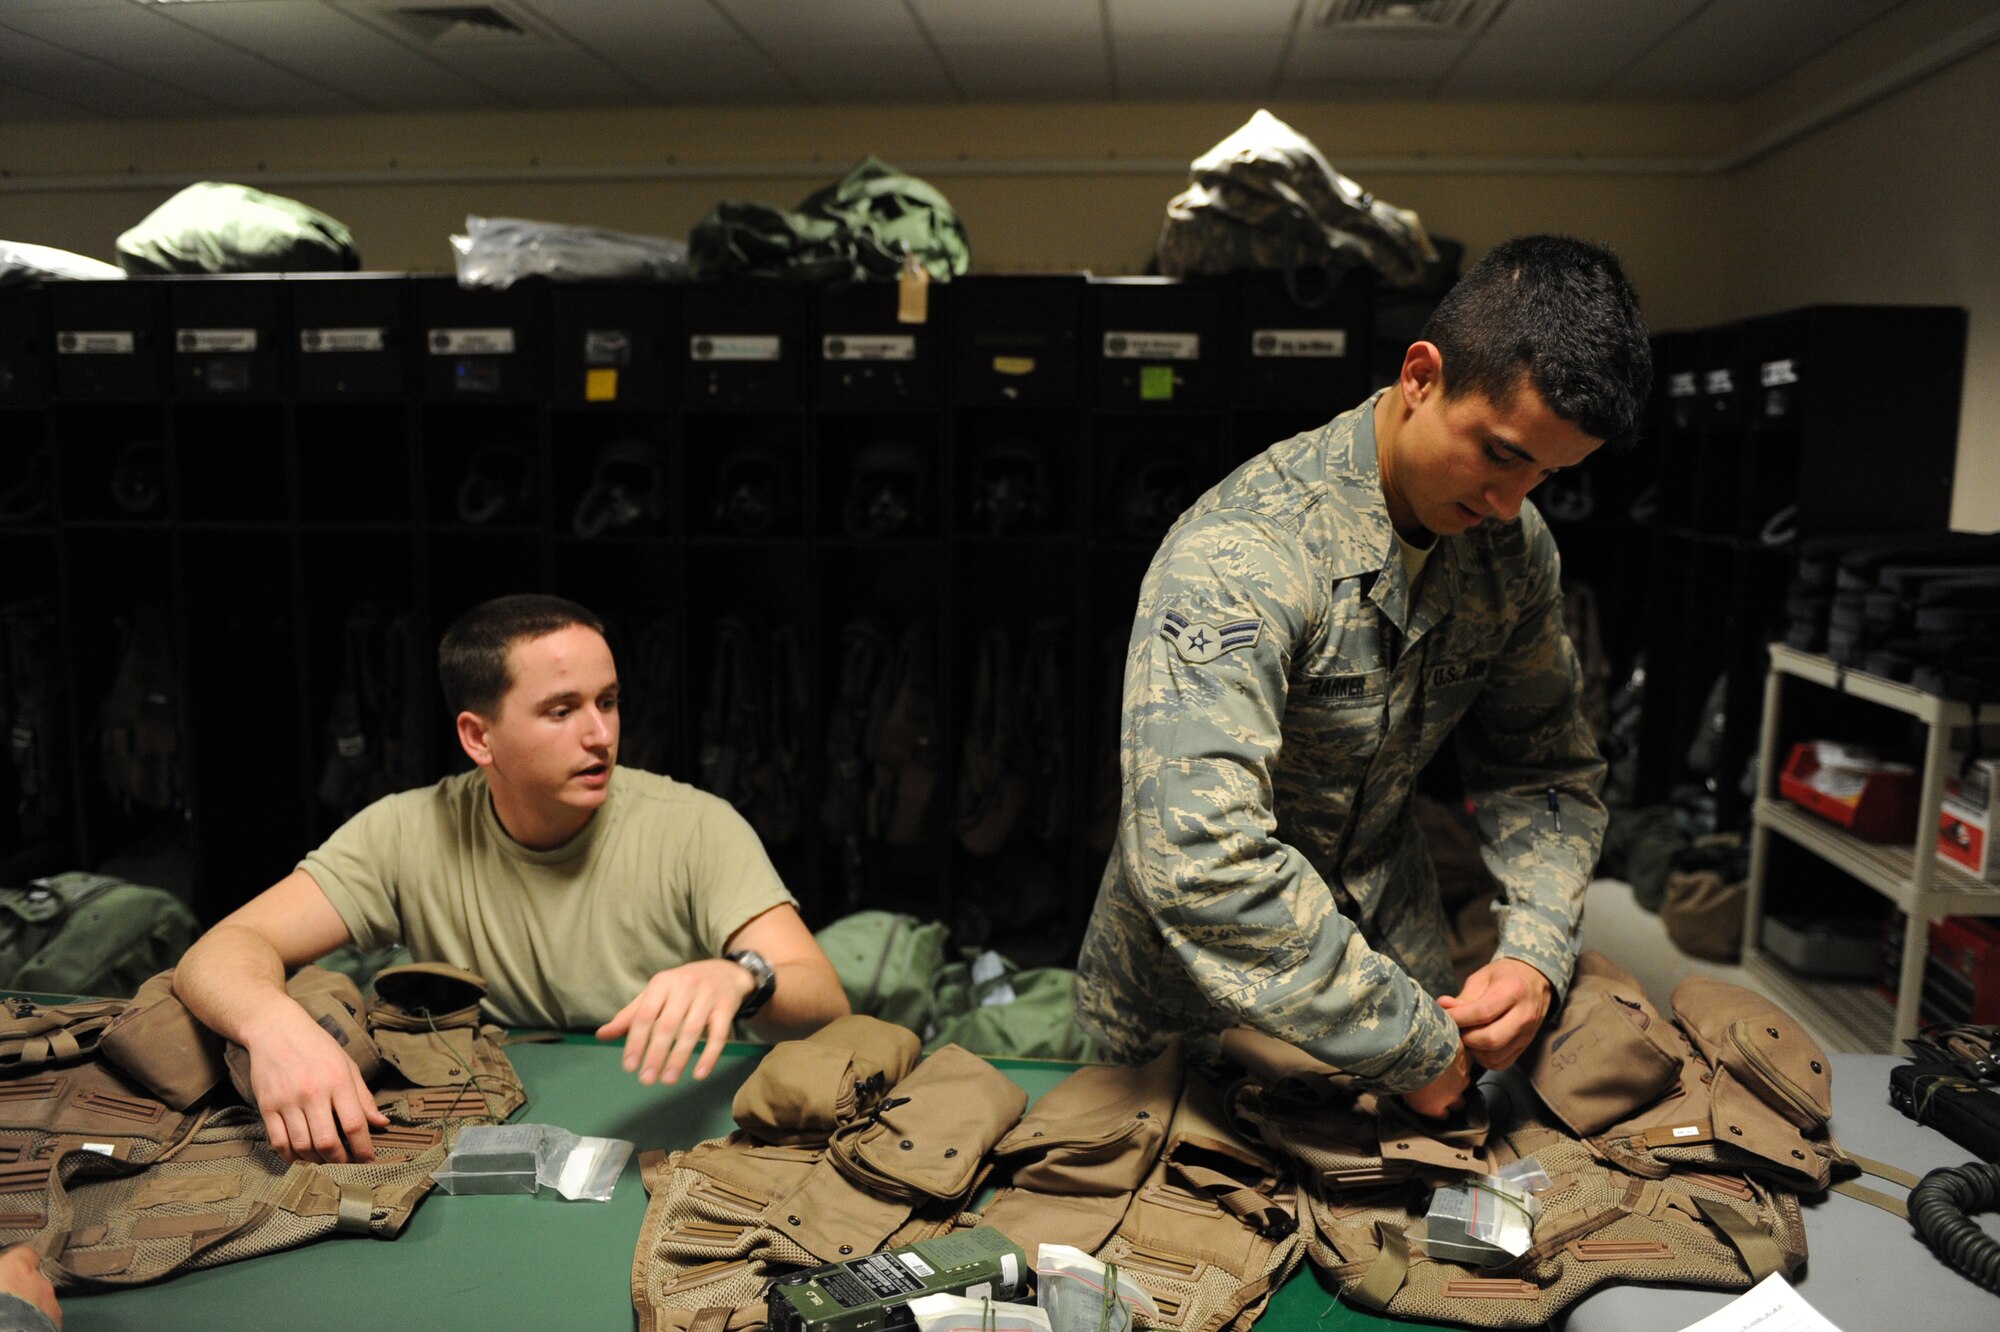 Airman Brandon Locke (left) and Airman 1st Class Stephen Barker, aircrew flight equipment journeymen assigned to the 37th Expeditionary Bomb Squadron, re-equip combat survival vests Jan. 24, 2010, in Southwest Asia. (U.S. Air Force photo/Staff Sgt. Manuel J. Martinez\Released)